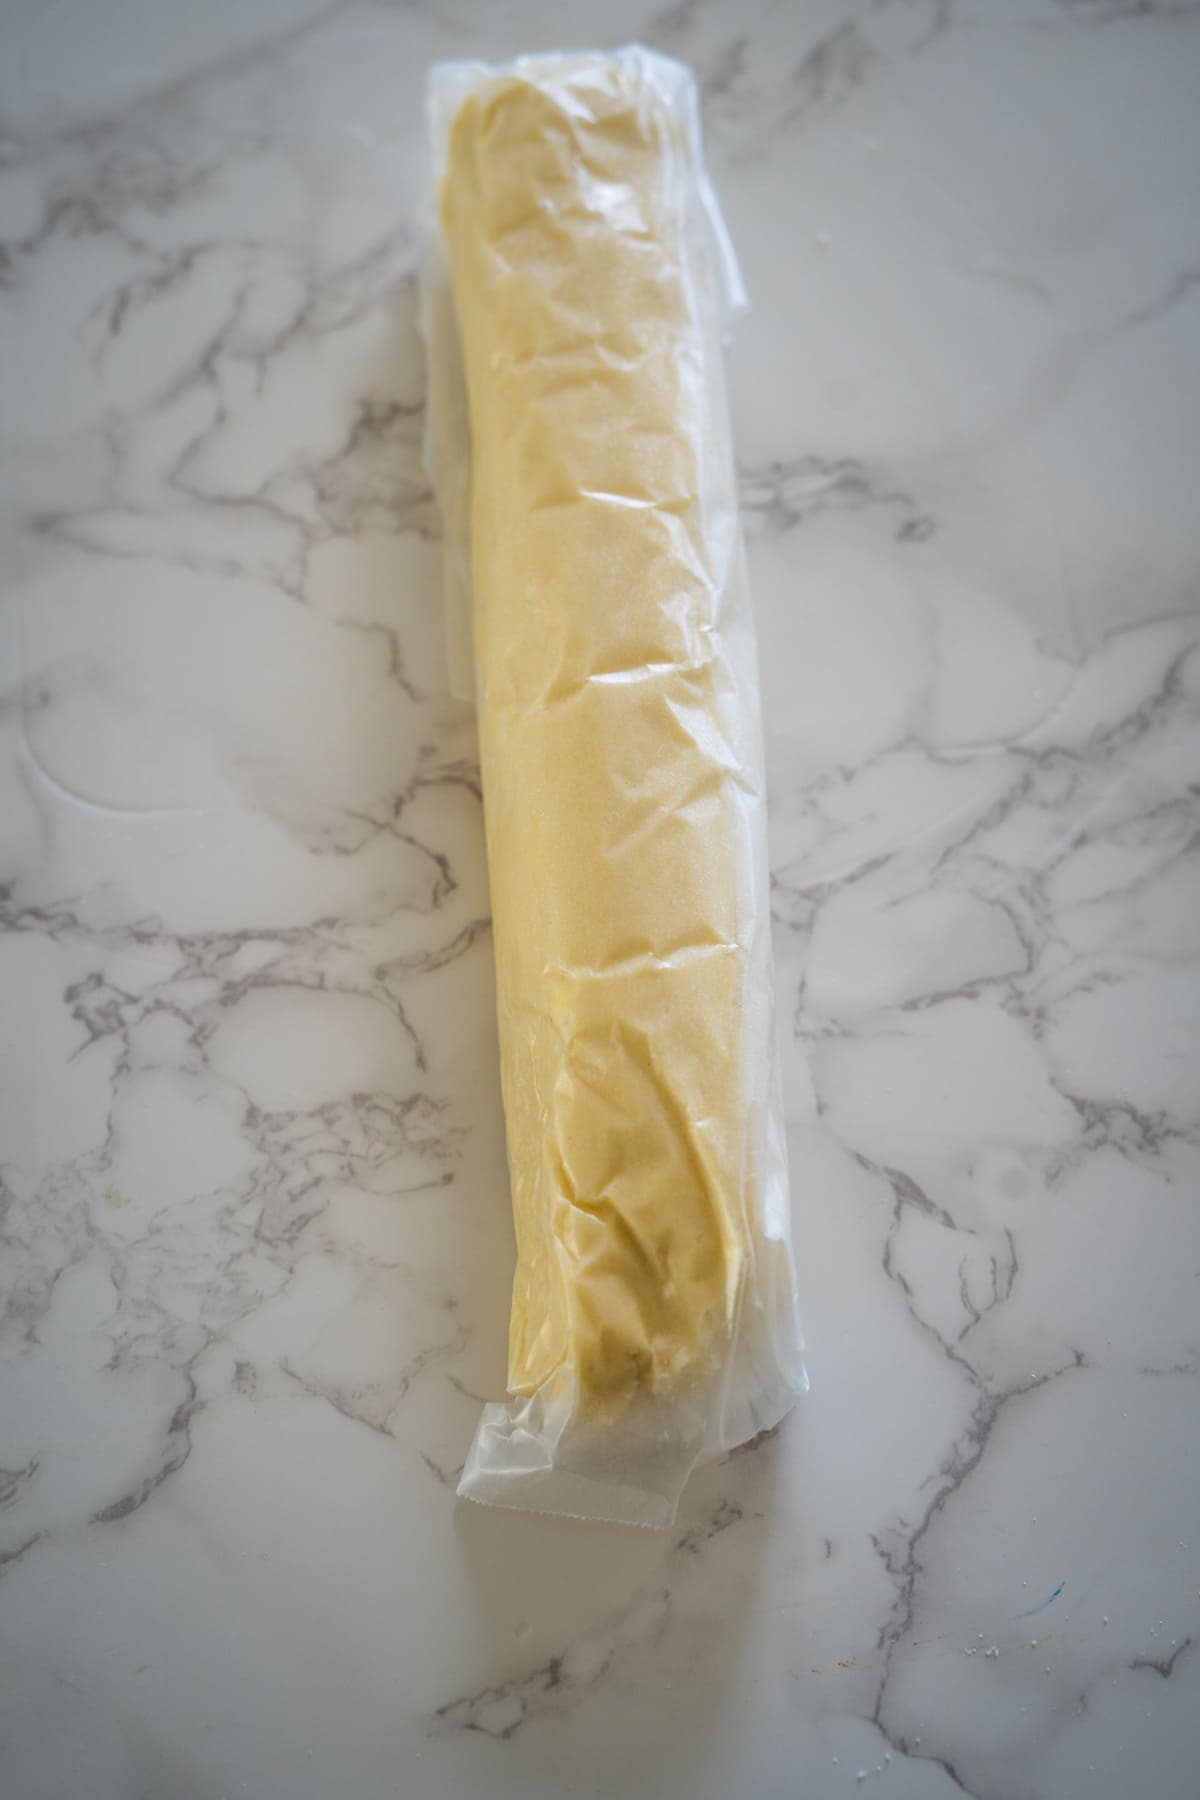 A raw keto filo pastry roll wrapped in plastic, placed on a marble countertop.